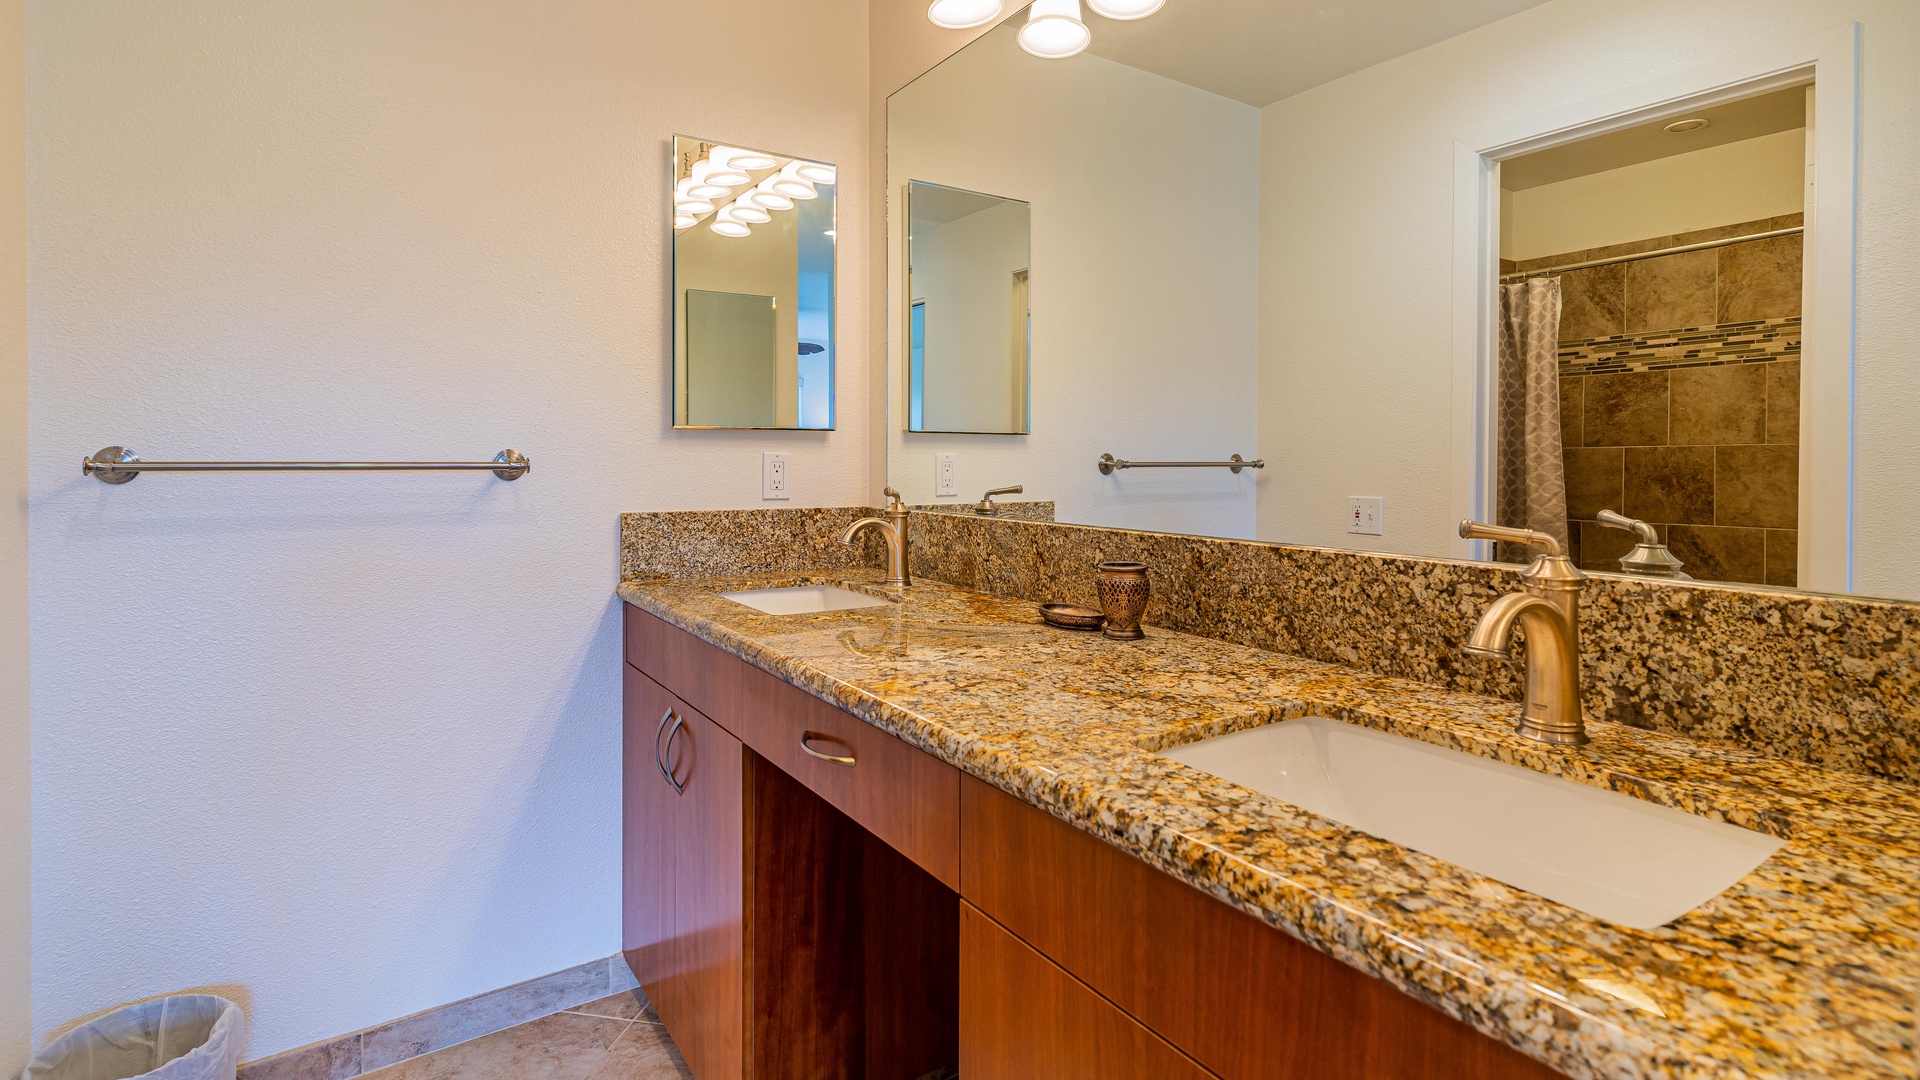 Kapolei Vacation Rentals, Fairways at Ko Olina 20G - The warm wood tones and double vanity in this high end guest bathoom.